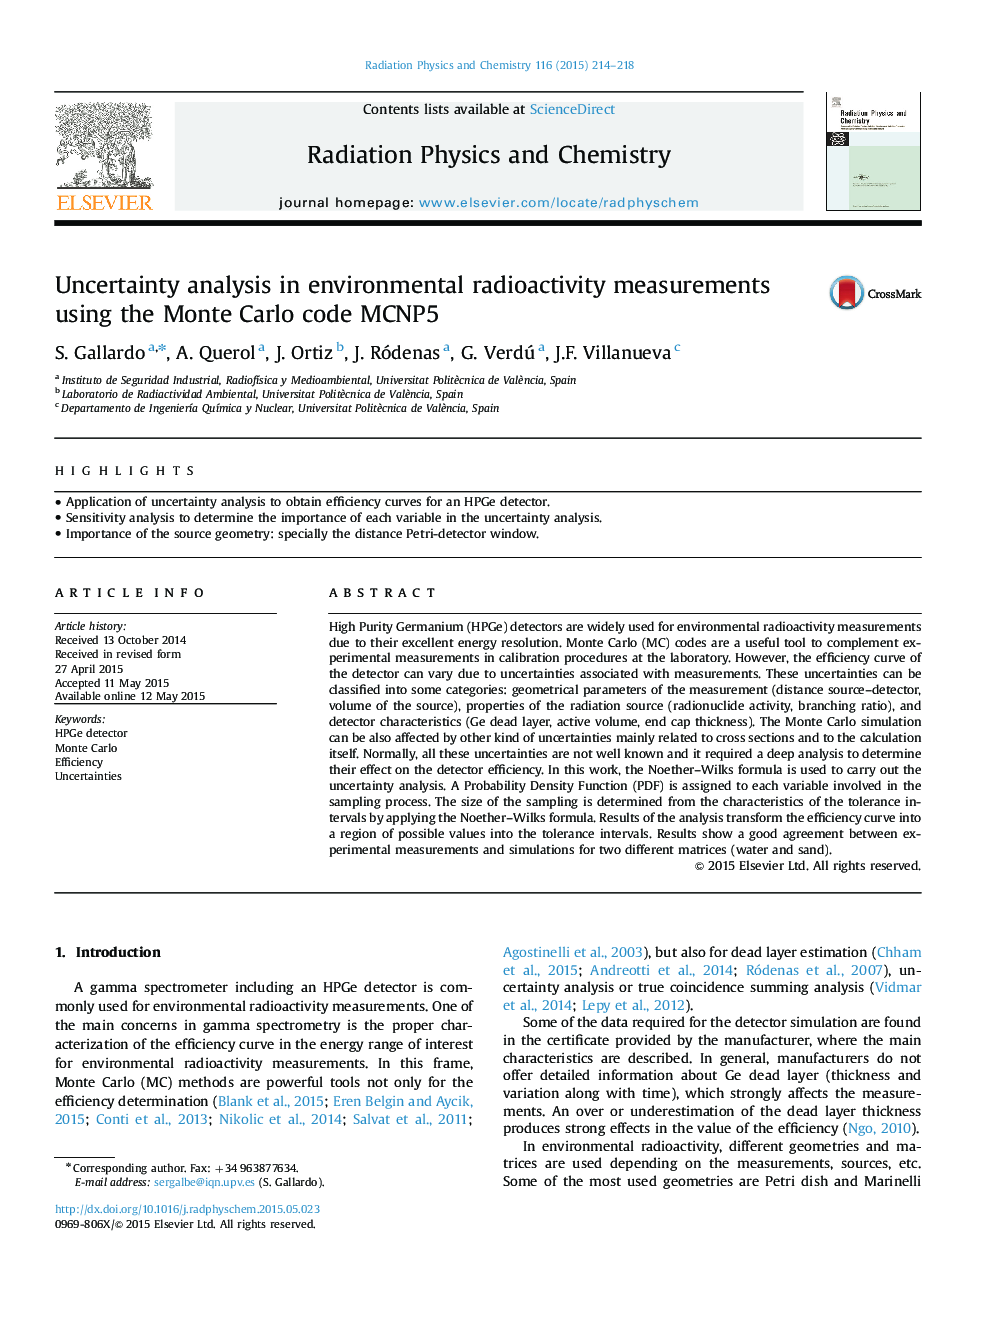 Uncertainty analysis in environmental radioactivity measurements using the Monte Carlo code MCNP5